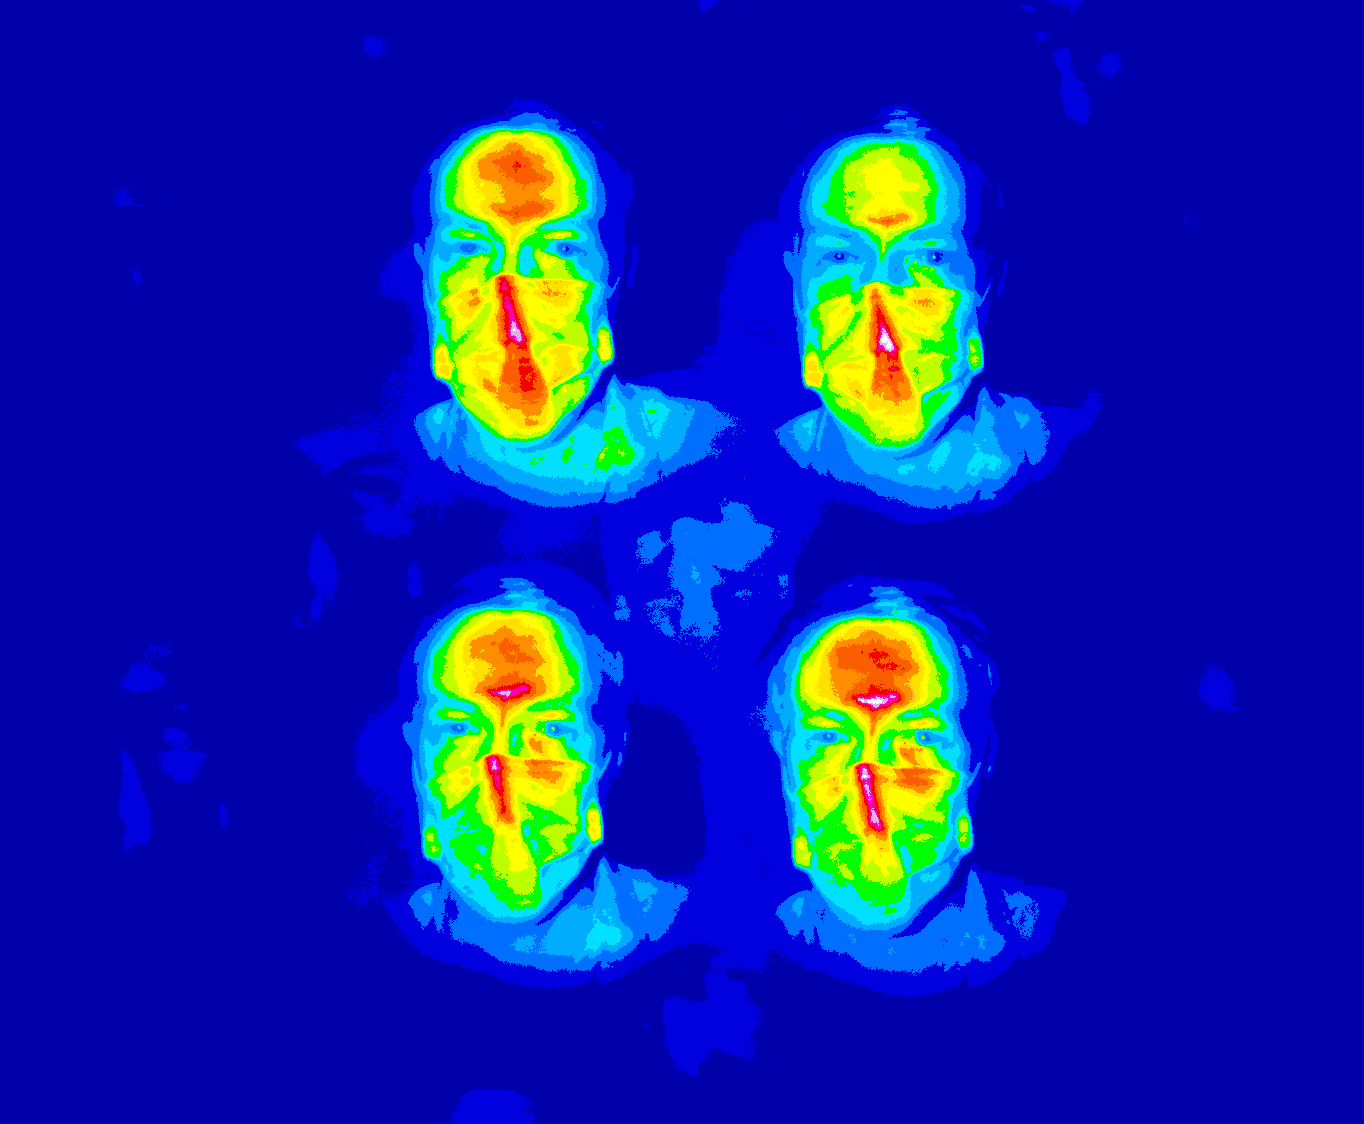 Polarized light splits into 4 streams, showing different details of a face.